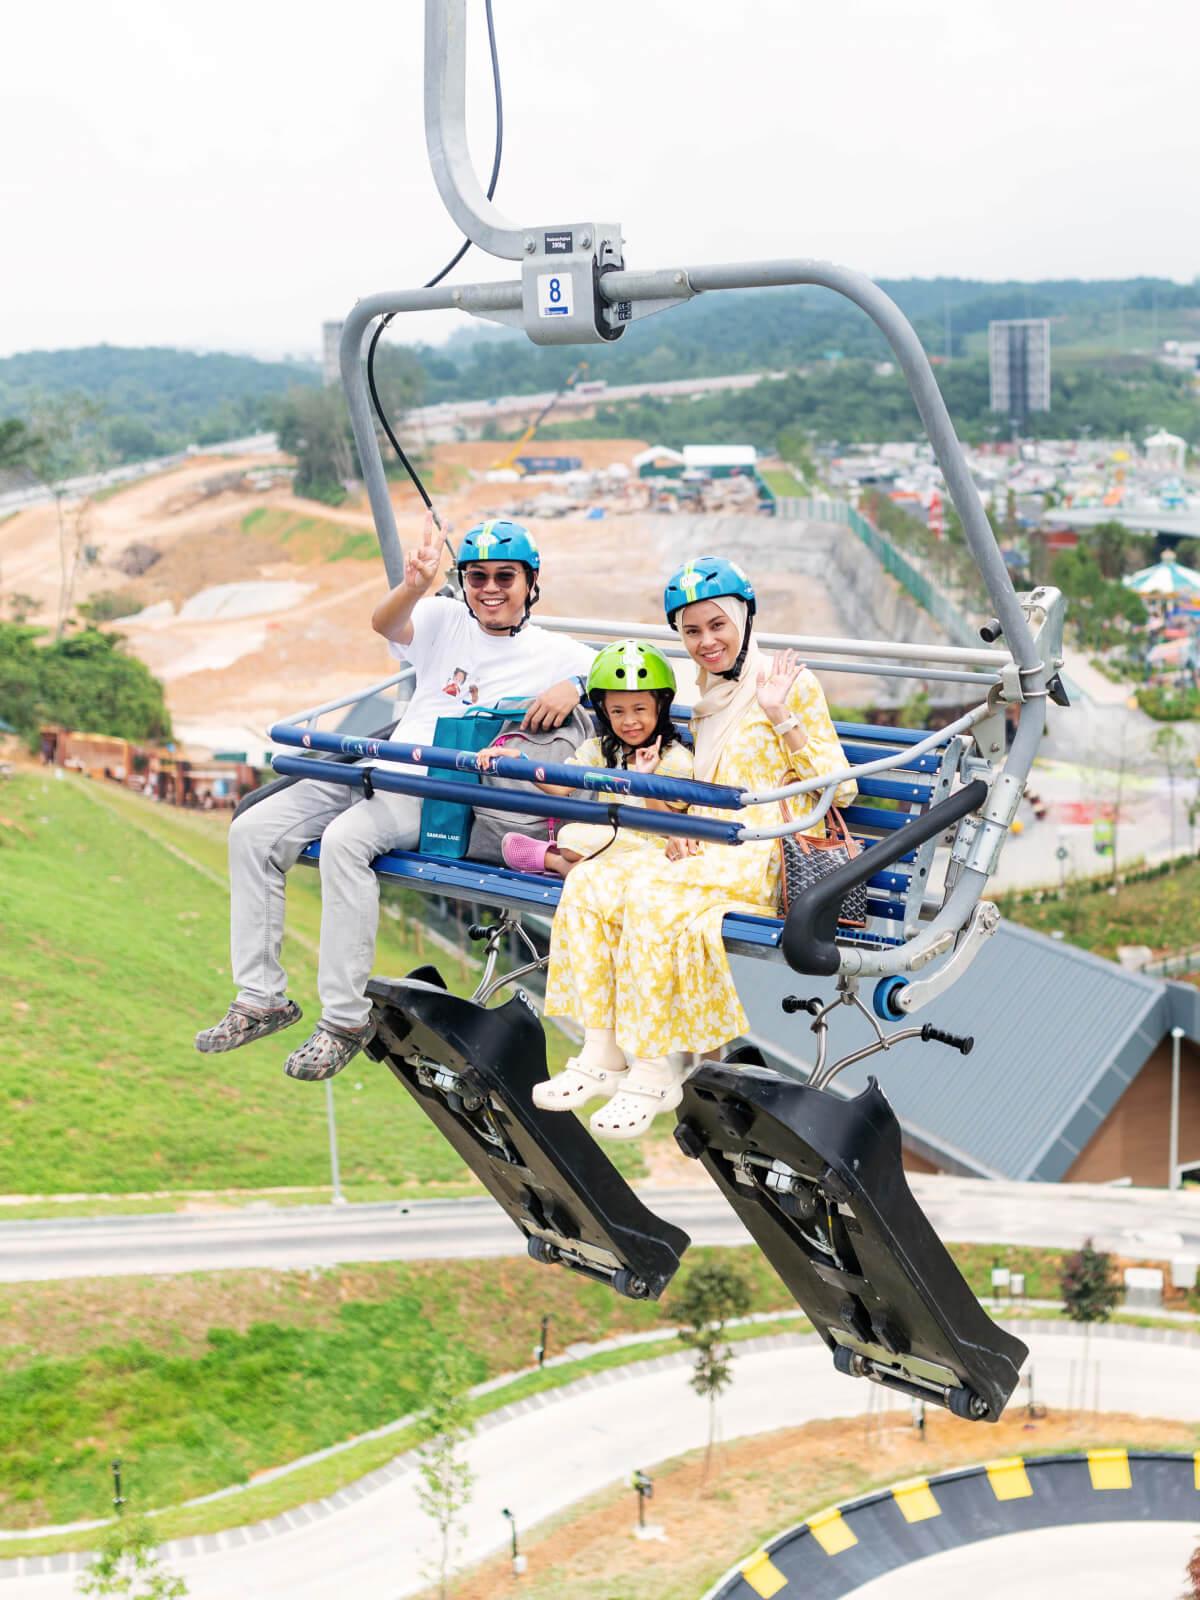 A family of three catches the chairlift to the top of the Luge tracks.